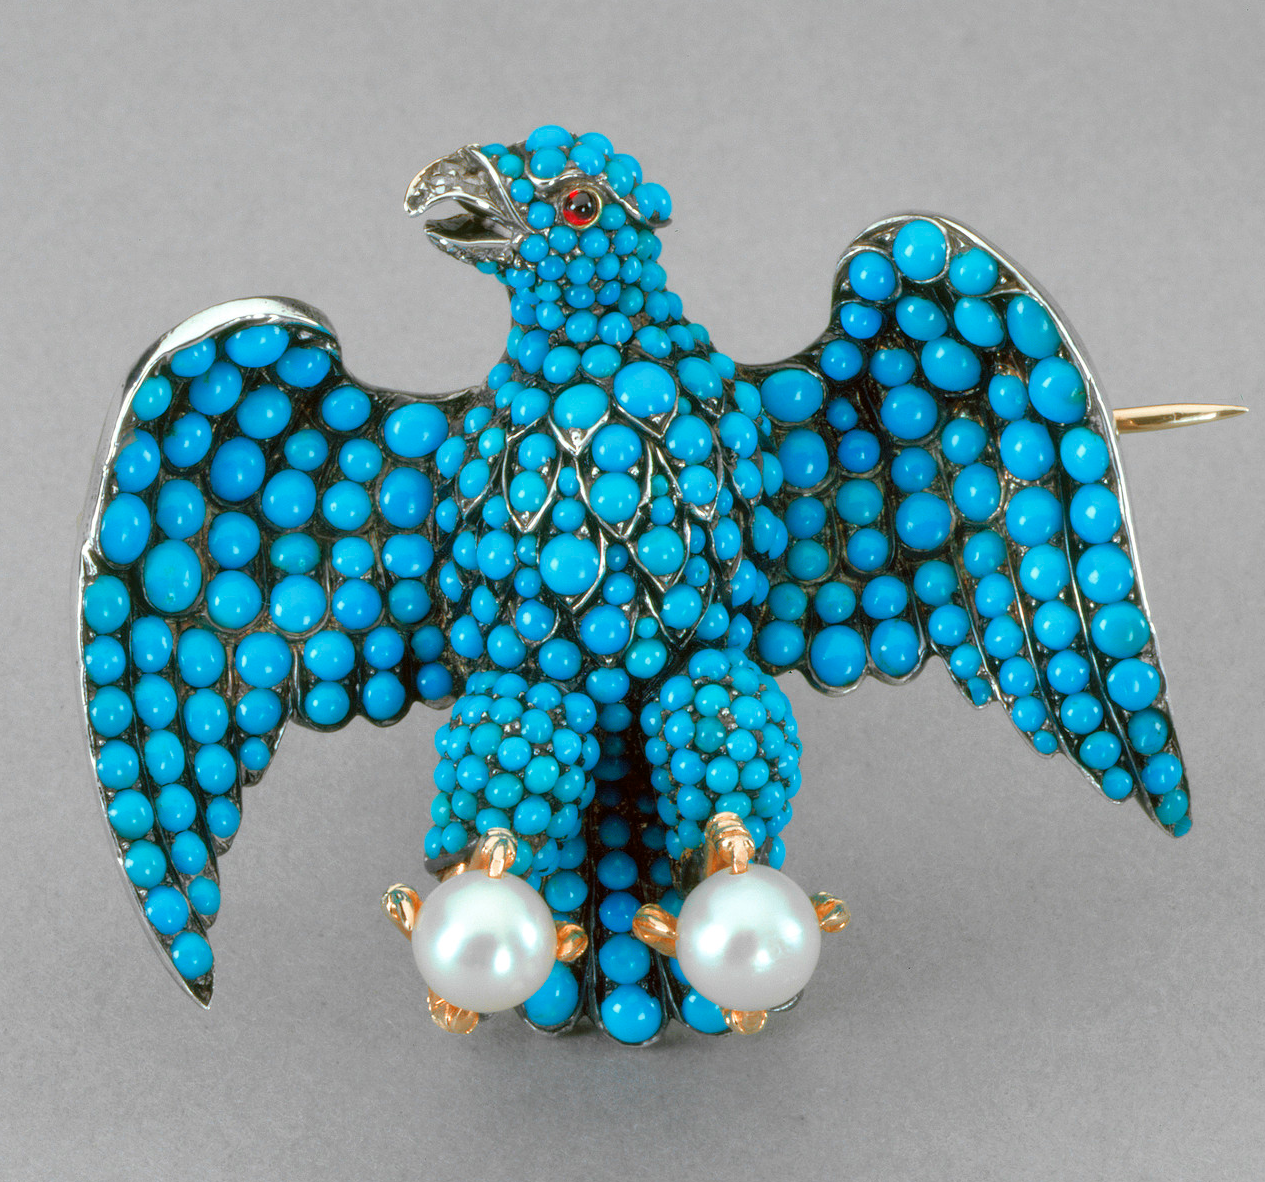 Prince Albert designed this eagle brooch that was given to each of Queen Victoria's train bearers. It has a turquoise form, diamond beak, ruby eyes and is grasping two large pearls in its claws.Brooch in the form of a German eagle, 1840. Royal Collection Trust.